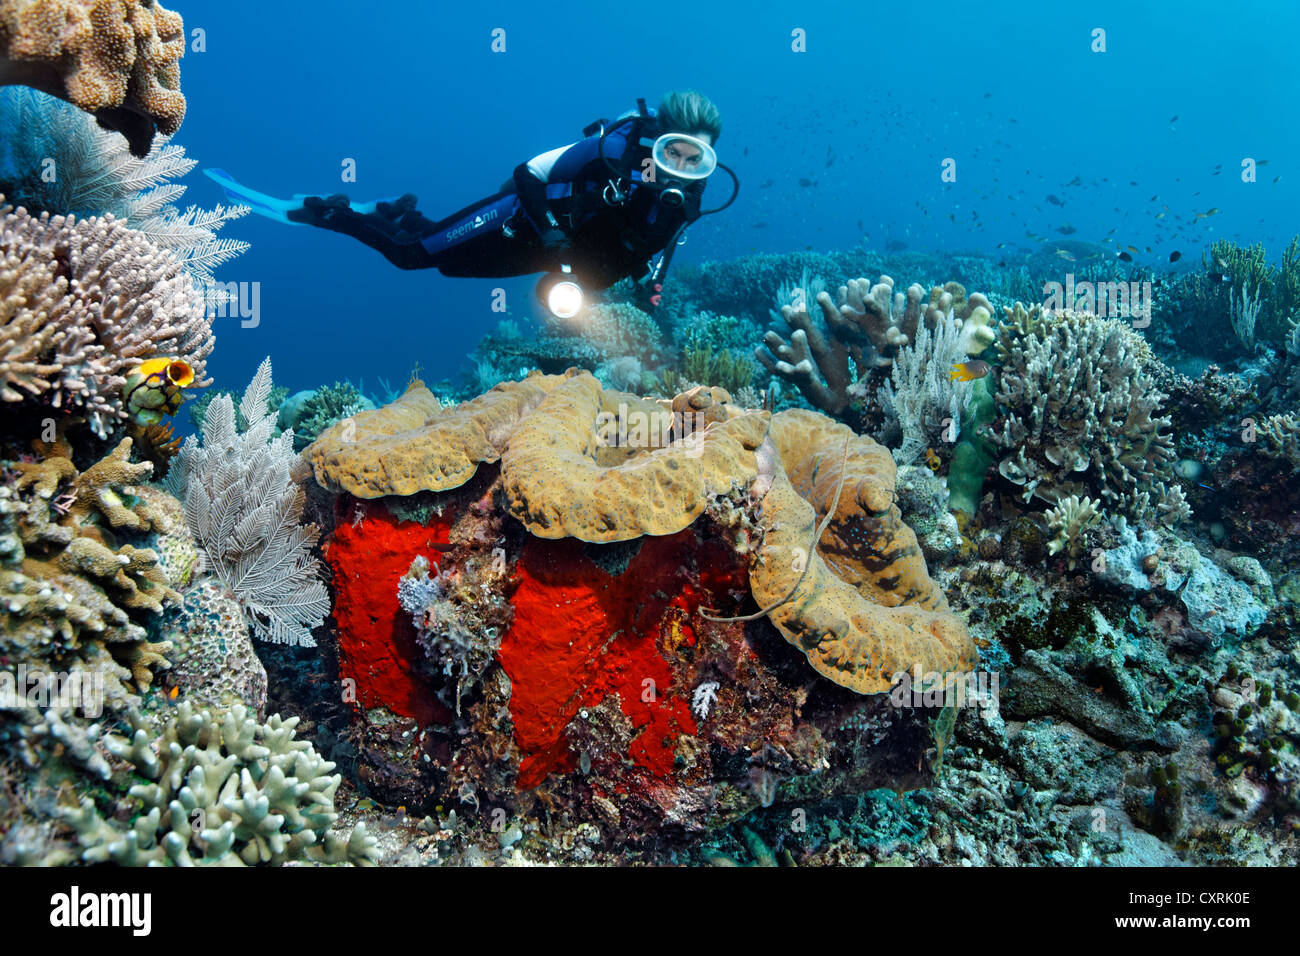 Female diver looking at a giant clam (Tridacna gigas), on a coral reef, Great Barrier Reef, a UNESCO World Heritage Site Stock Photo